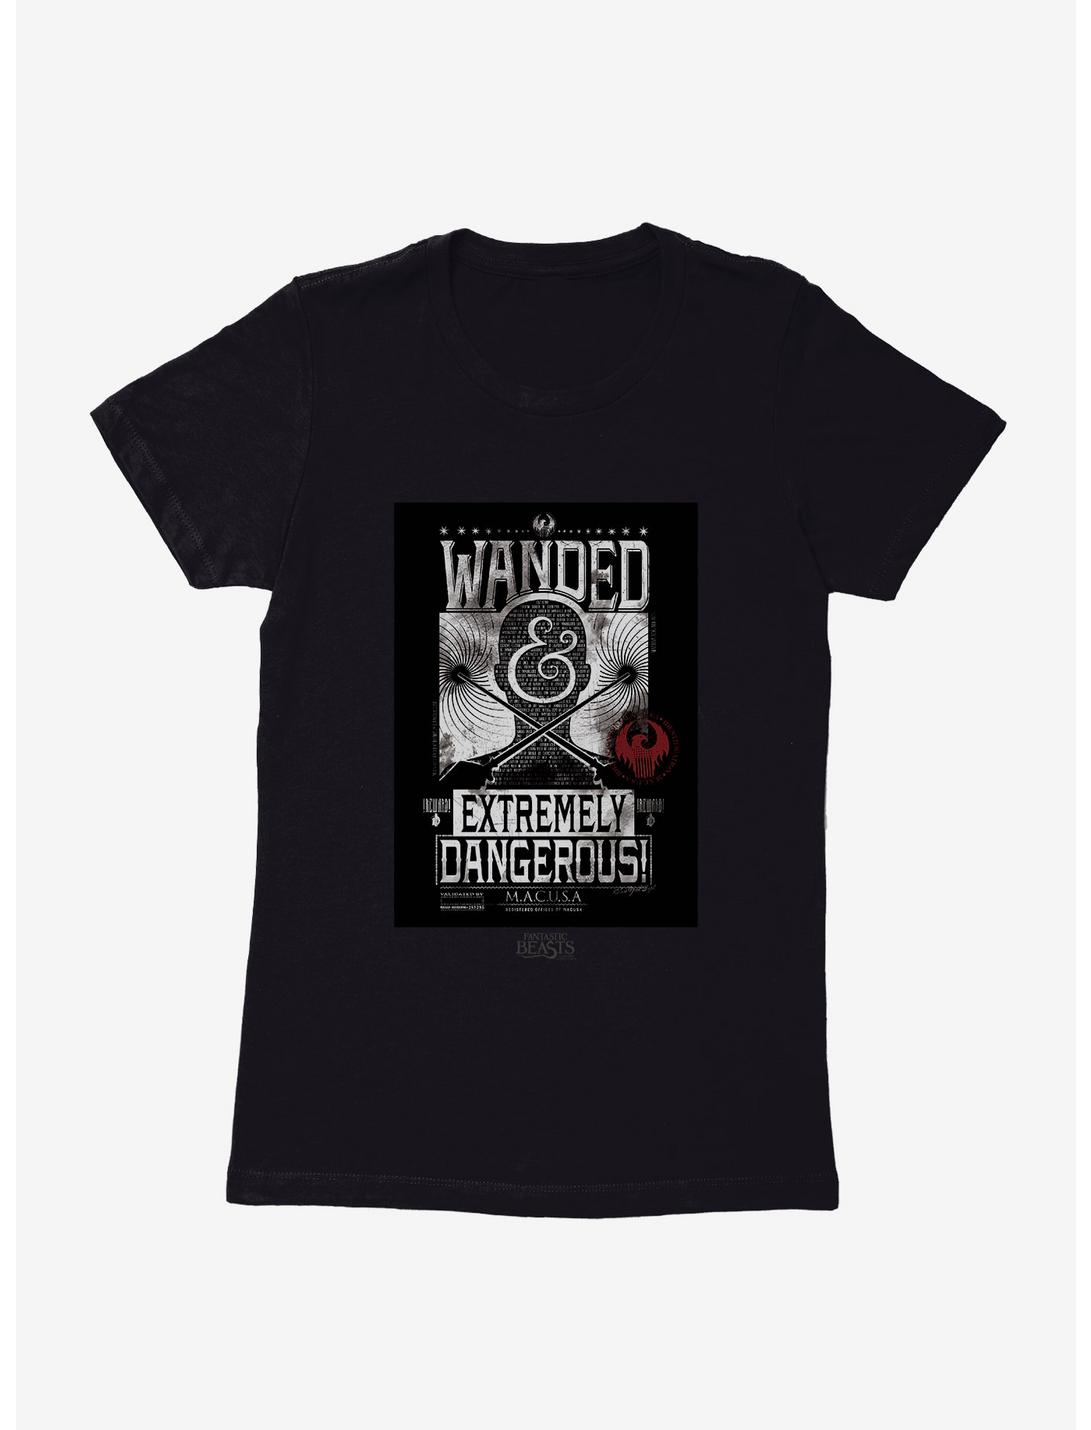 Fantastic Beasts Wanted Extremely Dangerous Womens T-Shirt, BLACK, hi-res